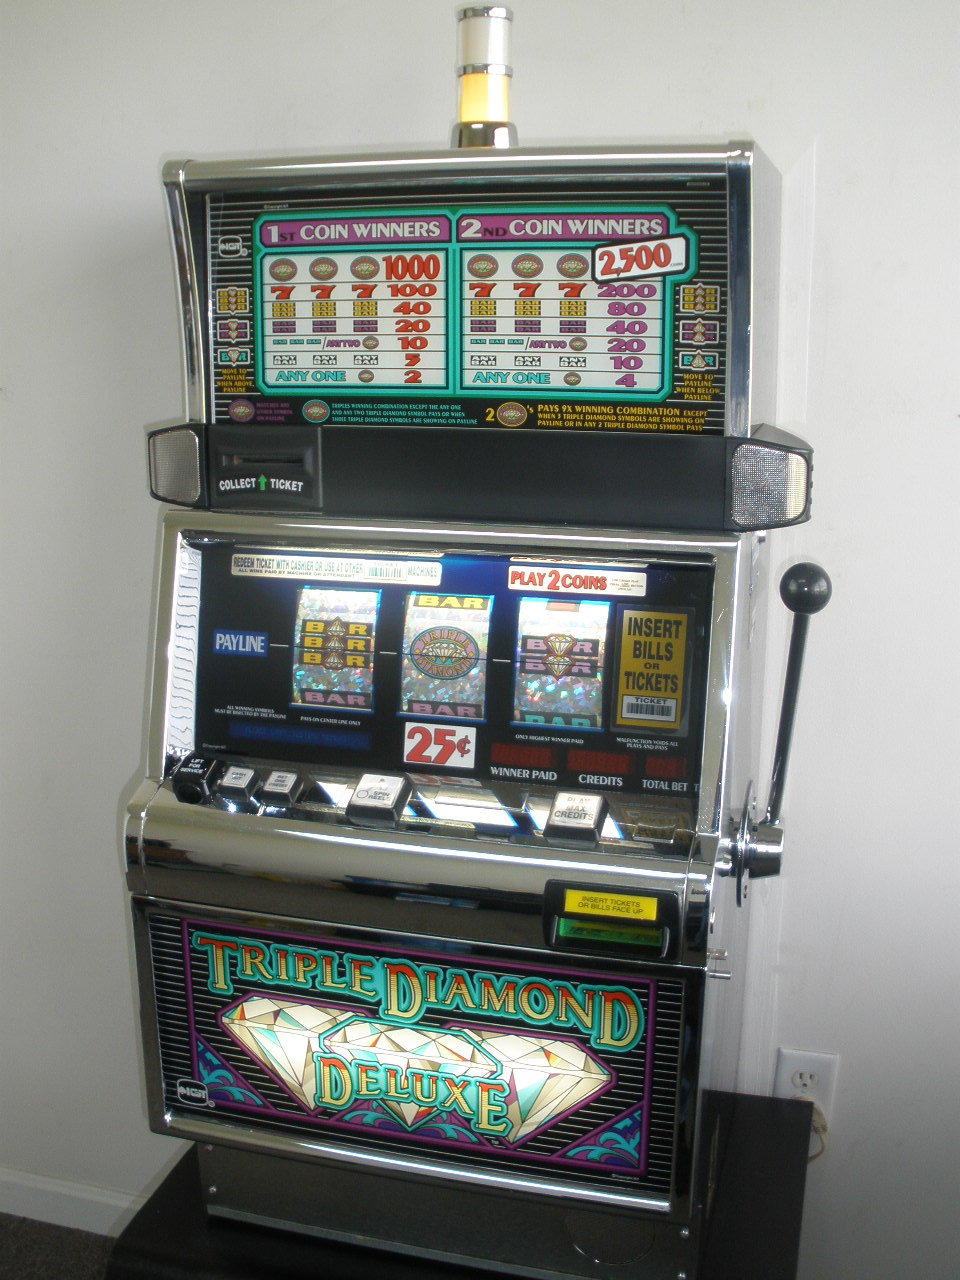 IGT TRIPLE DIAMOND DELUXE S2000 SLOT MACHINE - FLAT TOP - TWO CREDIT